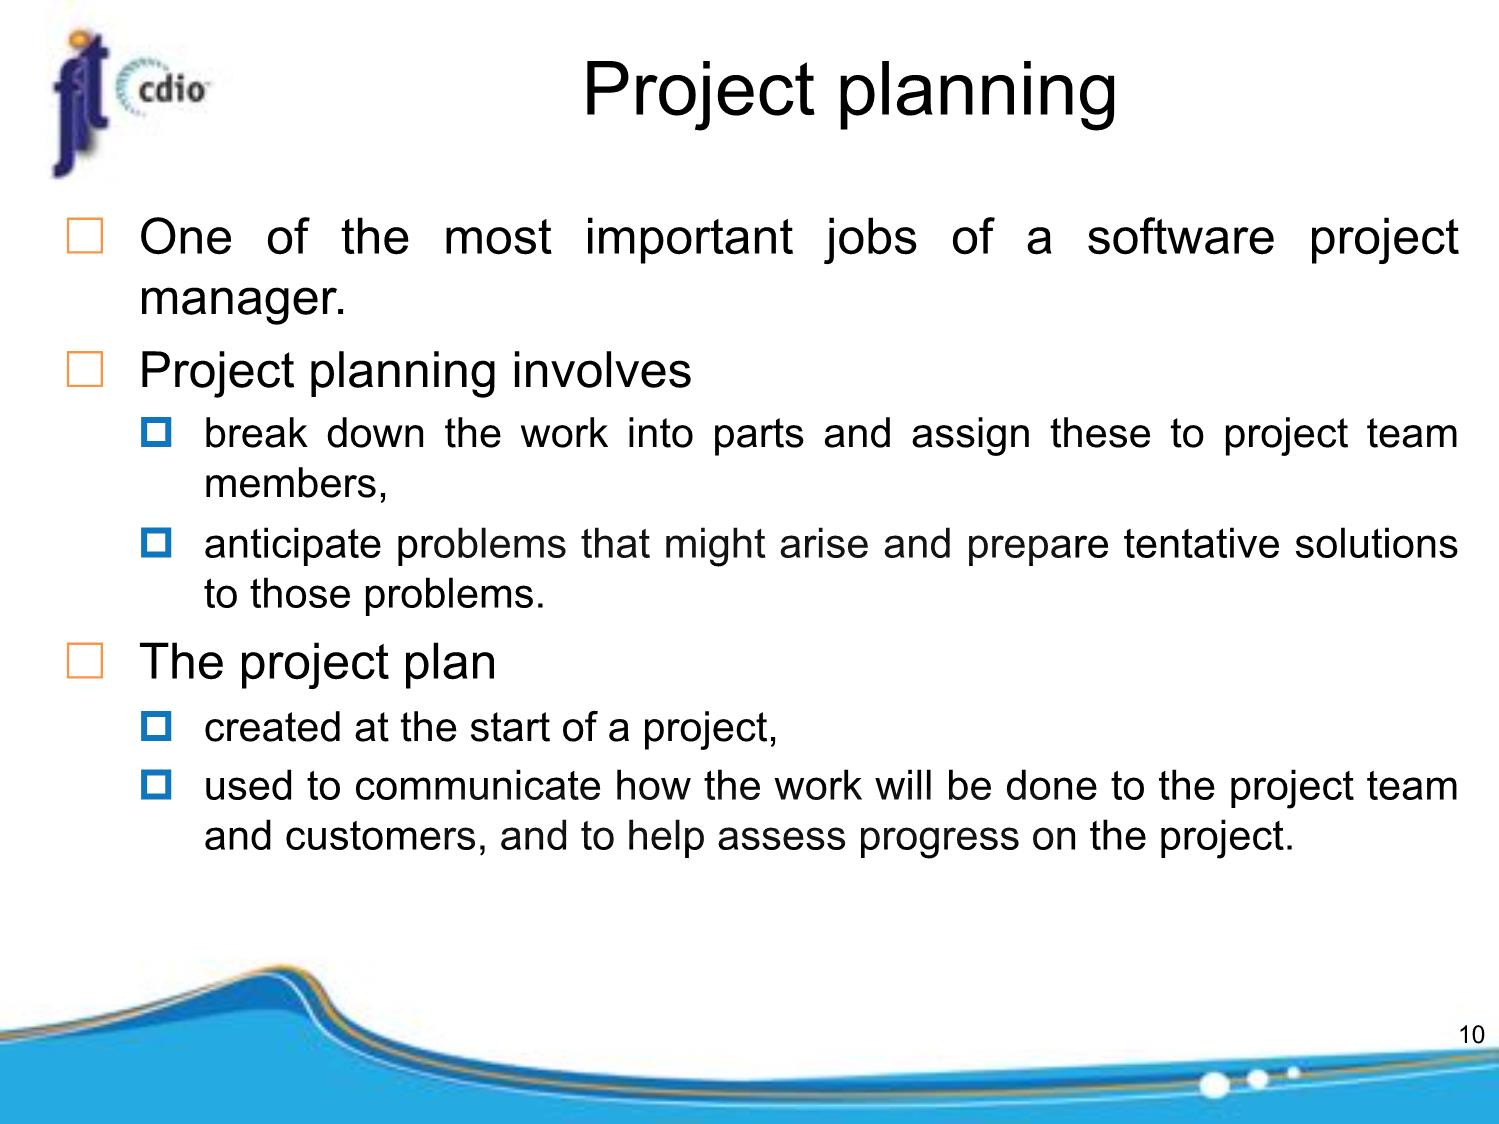 Bài giảng Introduction to Software Engineering - Week 3: Project management - Nguyễn Thị Minh Tuyền trang 10